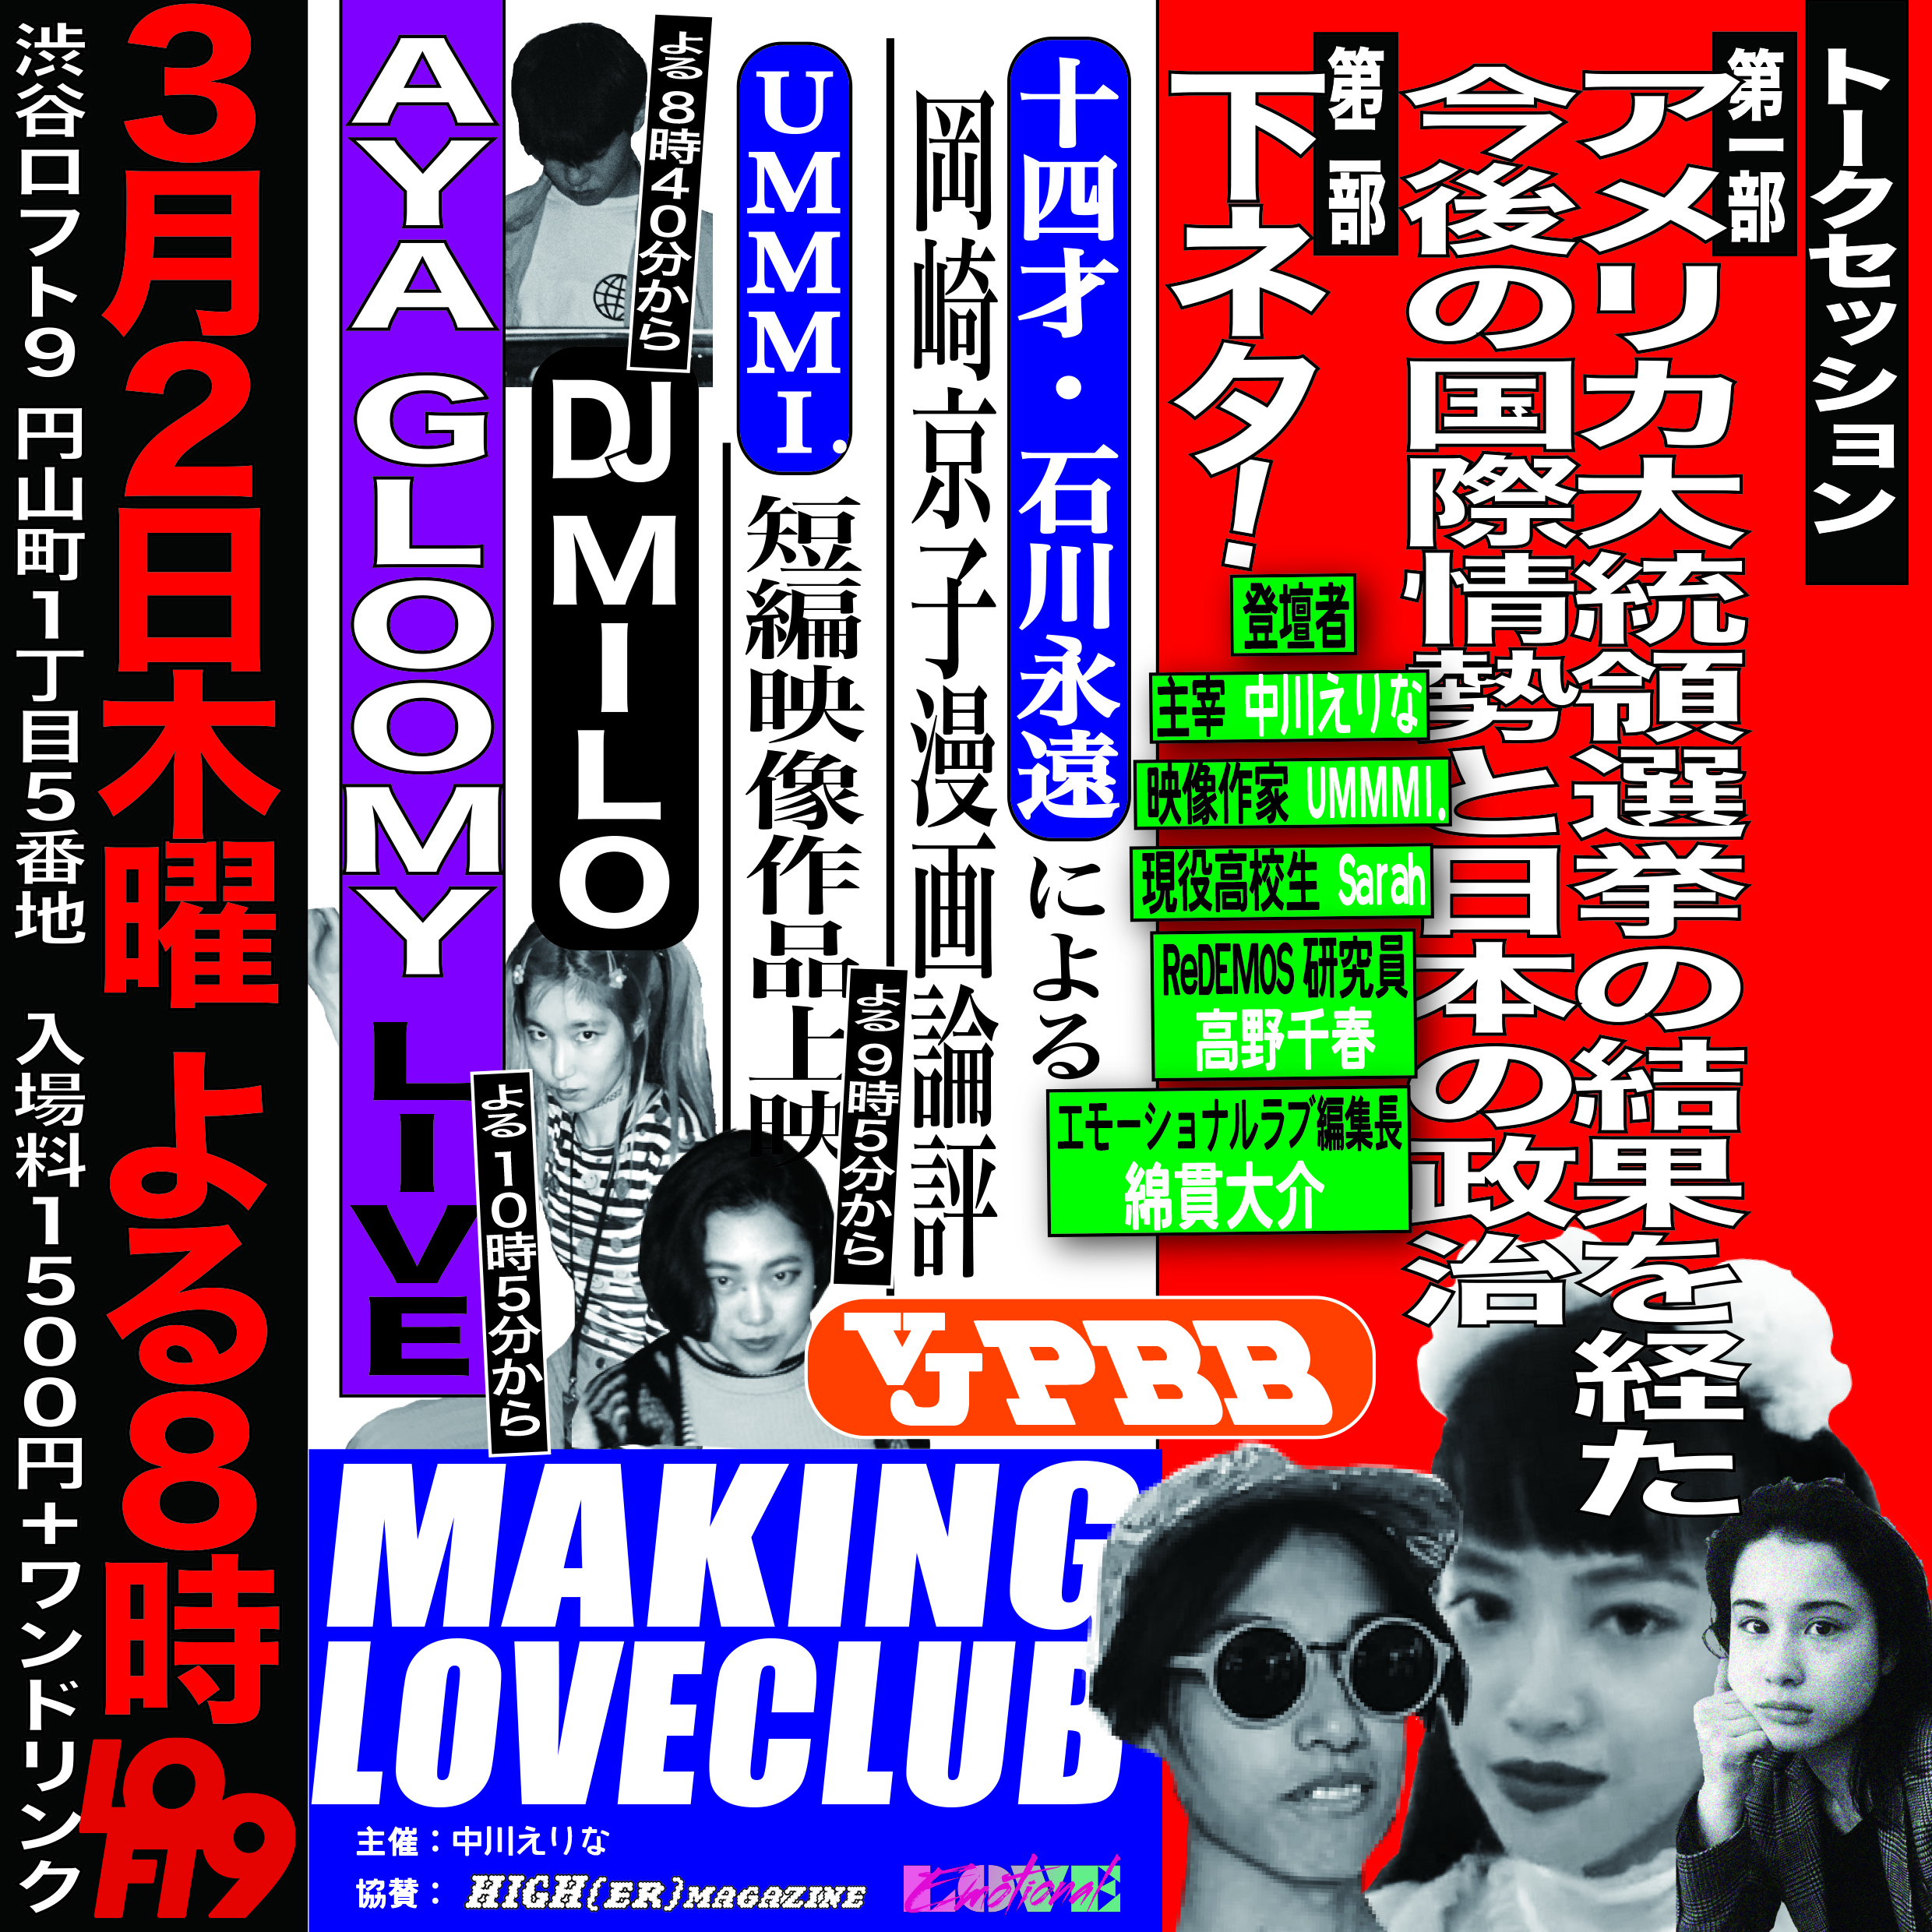 http://clubmakinglove.wixsite.com/2017